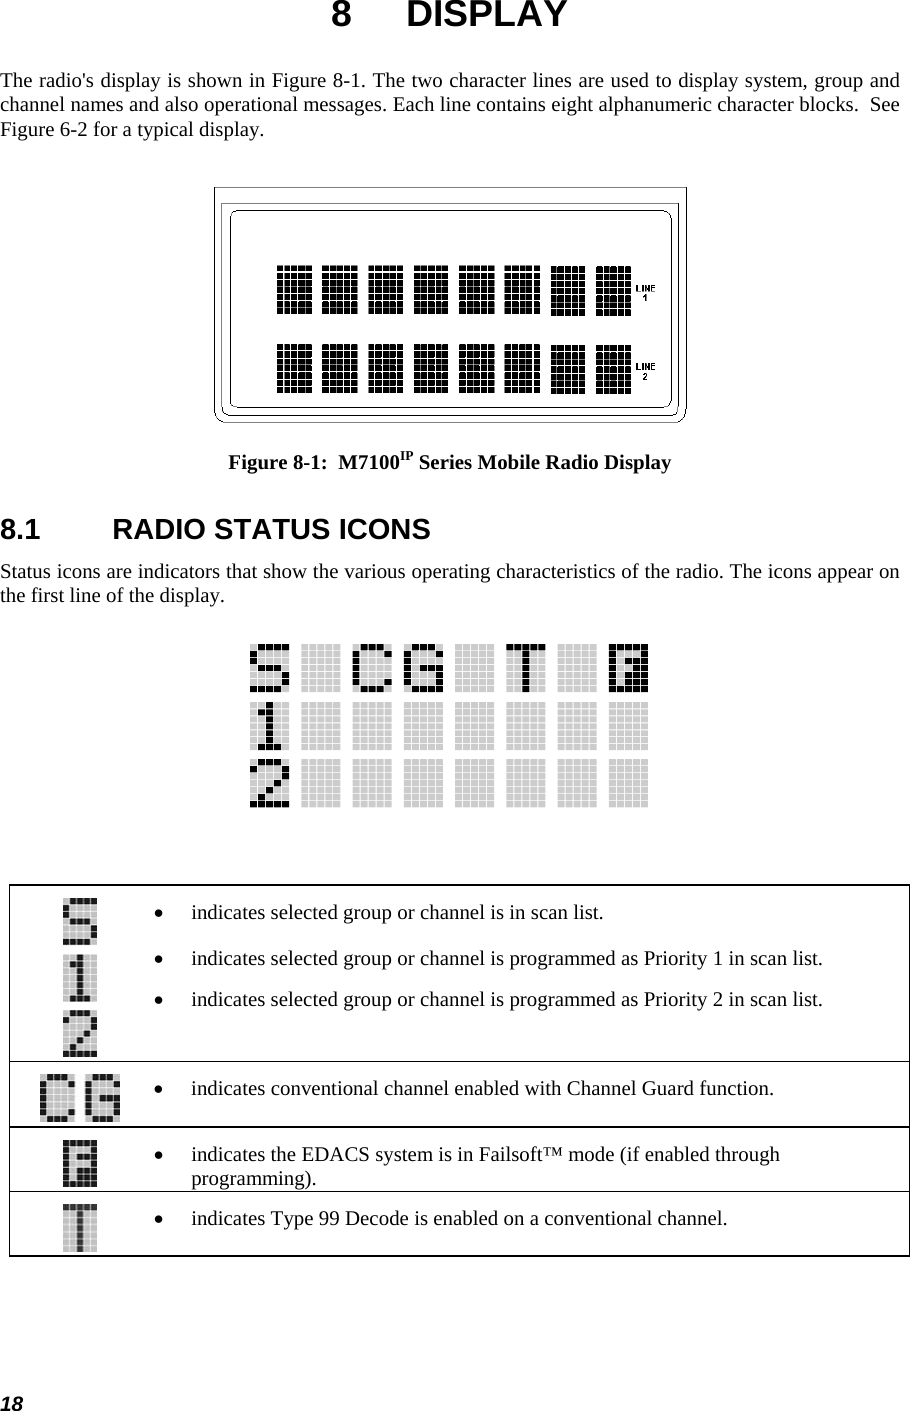  18 8 DISPLAY The radio&apos;s display is shown in Figure 8-1. The two character lines are used to display system, group and channel names and also operational messages. Each line contains eight alphanumeric character blocks.  See Figure 6-2 for a typical display.   Figure 8-1:  M7100IP Series Mobile Radio Display 8.1  RADIO STATUS ICONS Status icons are indicators that show the various operating characteristics of the radio. The icons appear on the first line of the display.     •  indicates selected group or channel is in scan list. •  indicates selected group or channel is programmed as Priority 1 in scan list. •  indicates selected group or channel is programmed as Priority 2 in scan list.   •  indicates conventional channel enabled with Channel Guard function.   •  indicates the EDACS system is in Failsoft™ mode (if enabled through programming).   •  indicates Type 99 Decode is enabled on a conventional channel.  